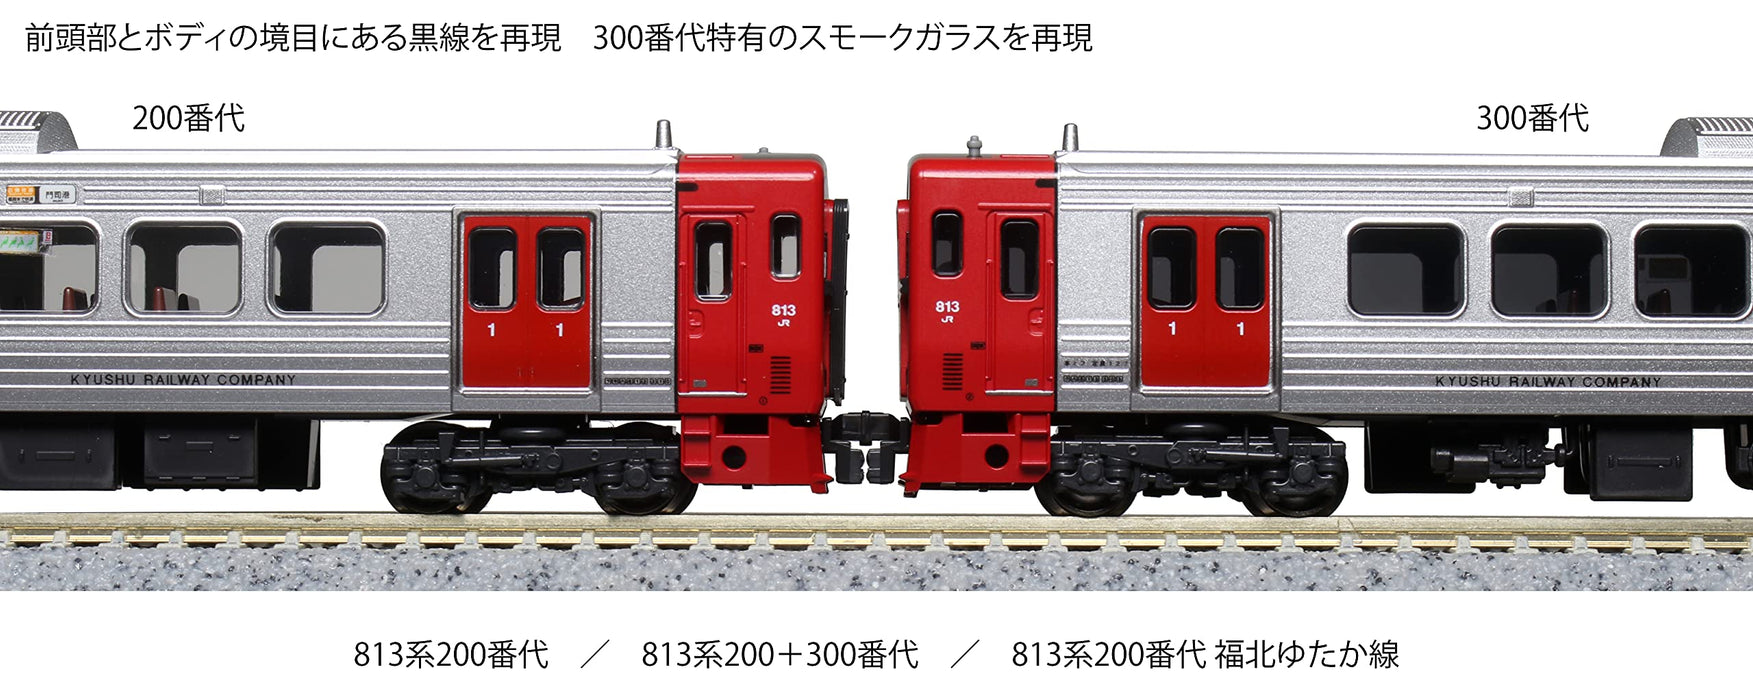 Kato N Gauge 813 Series 6-Car Set Model Train Special Project Product 10-1689